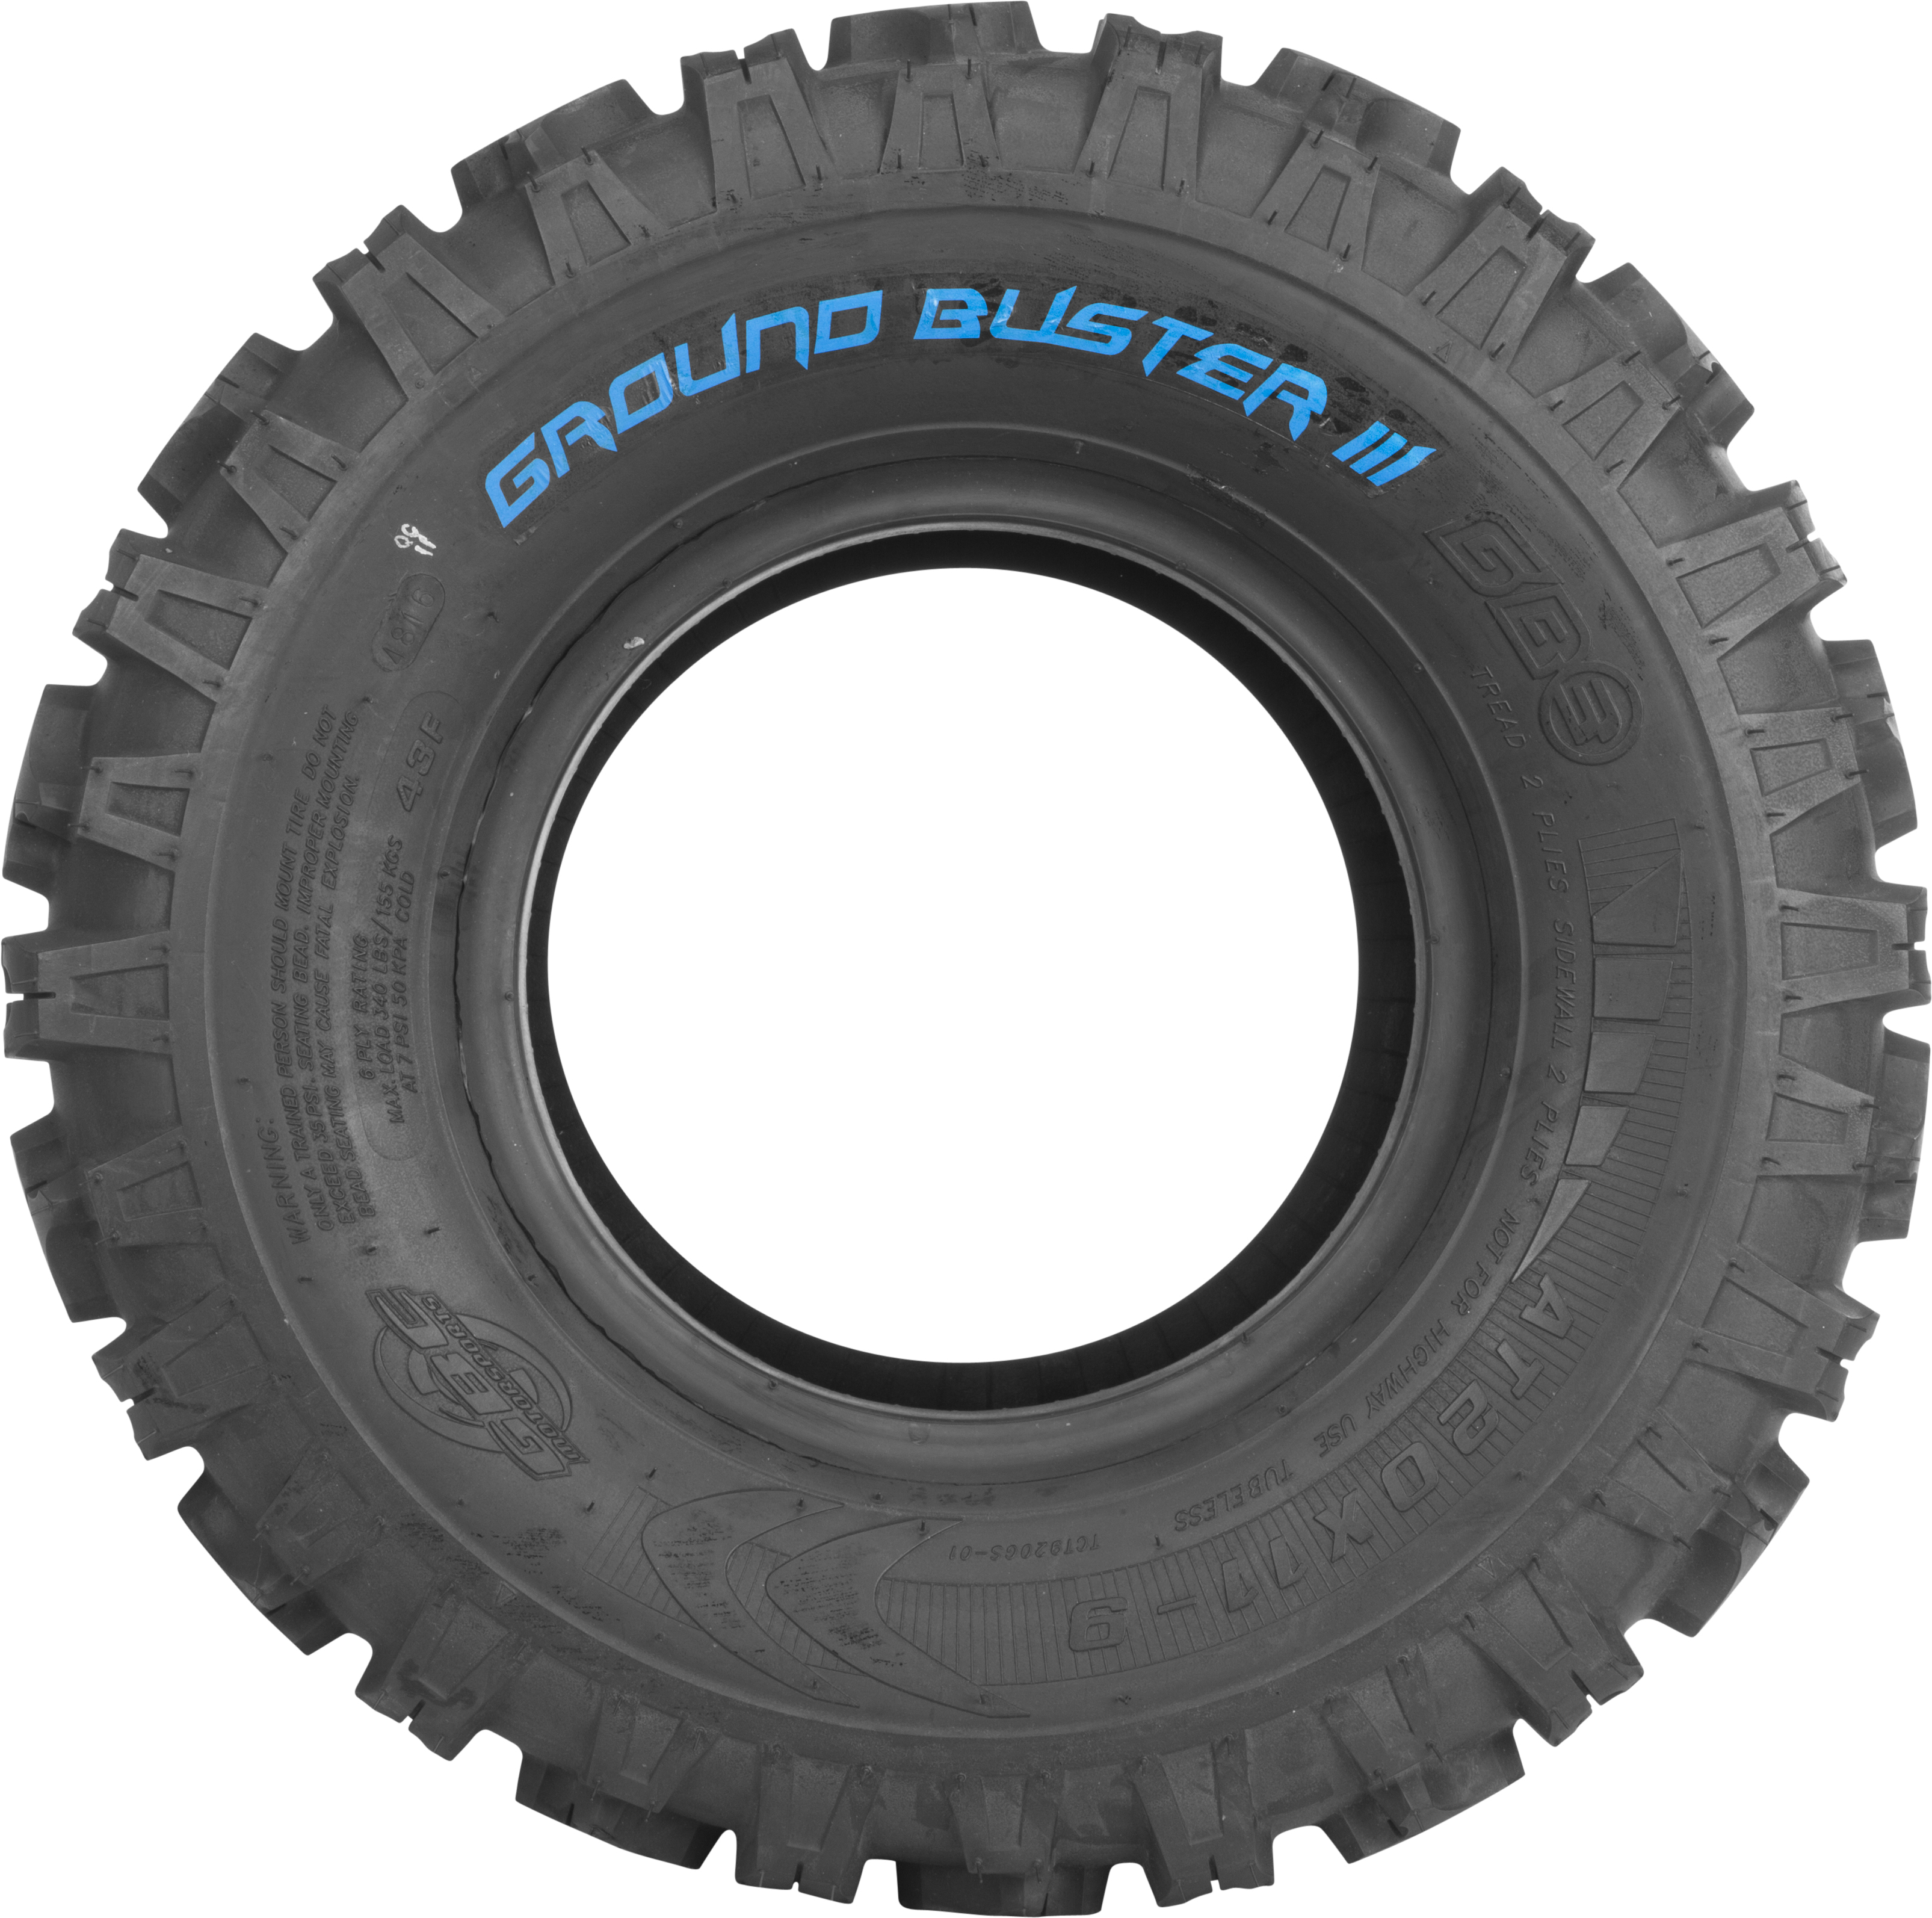 Tire Ground Buster III Rear 20X11-9 Bias LR-340LBS - Click Image to Close